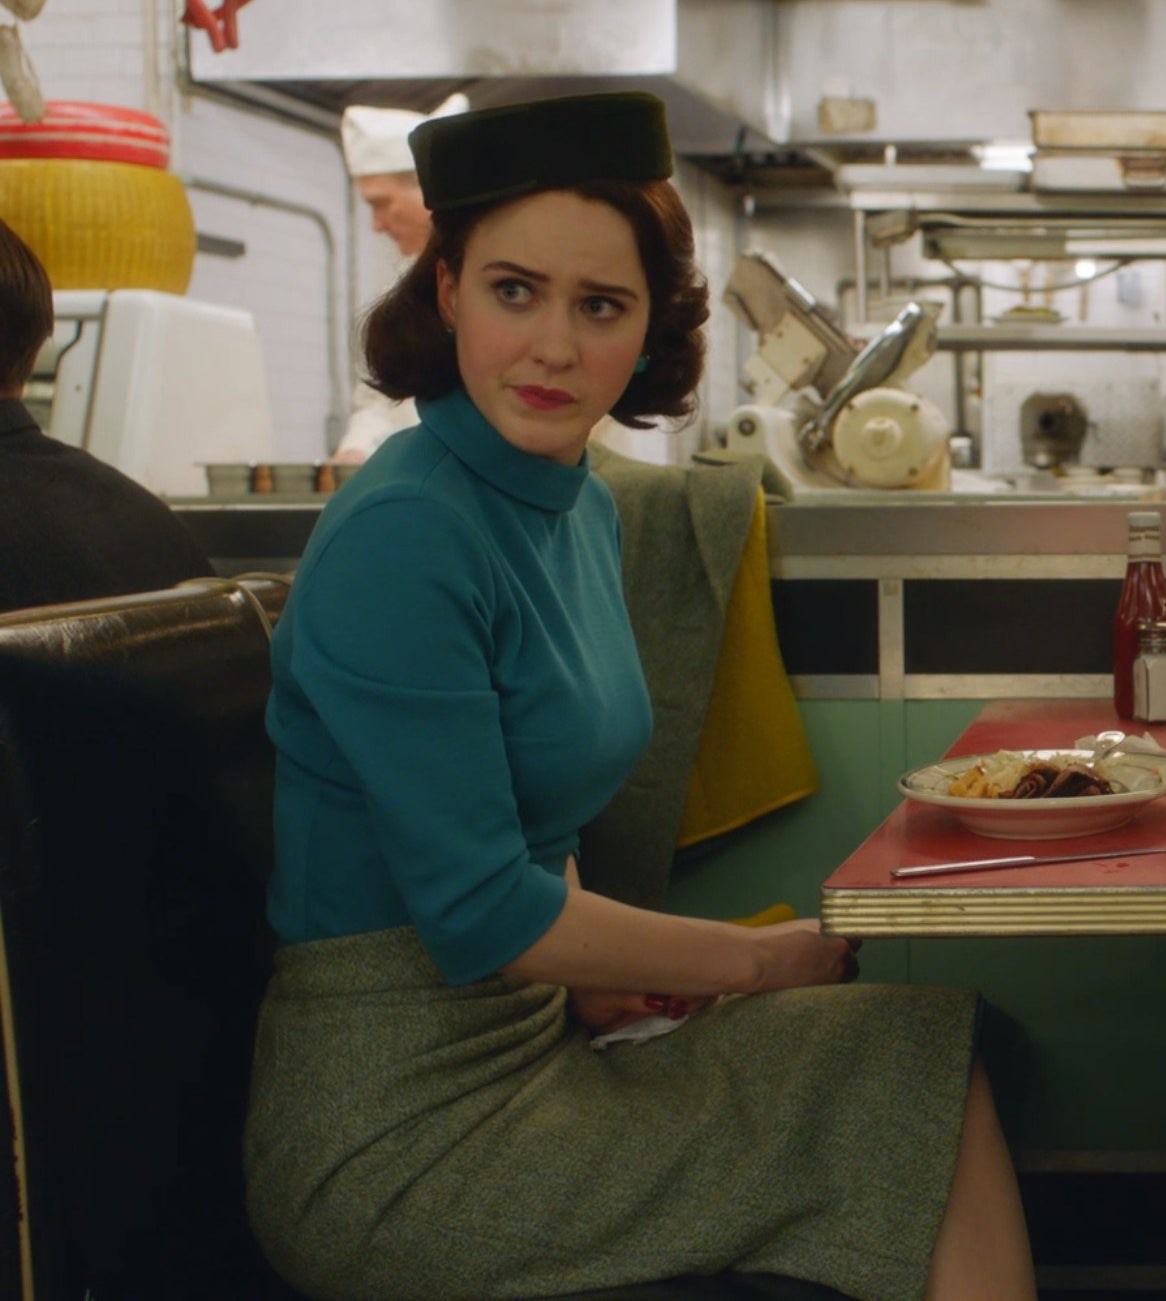 Screenshot from Mrs. Maisel shows Midge sitting at a diner